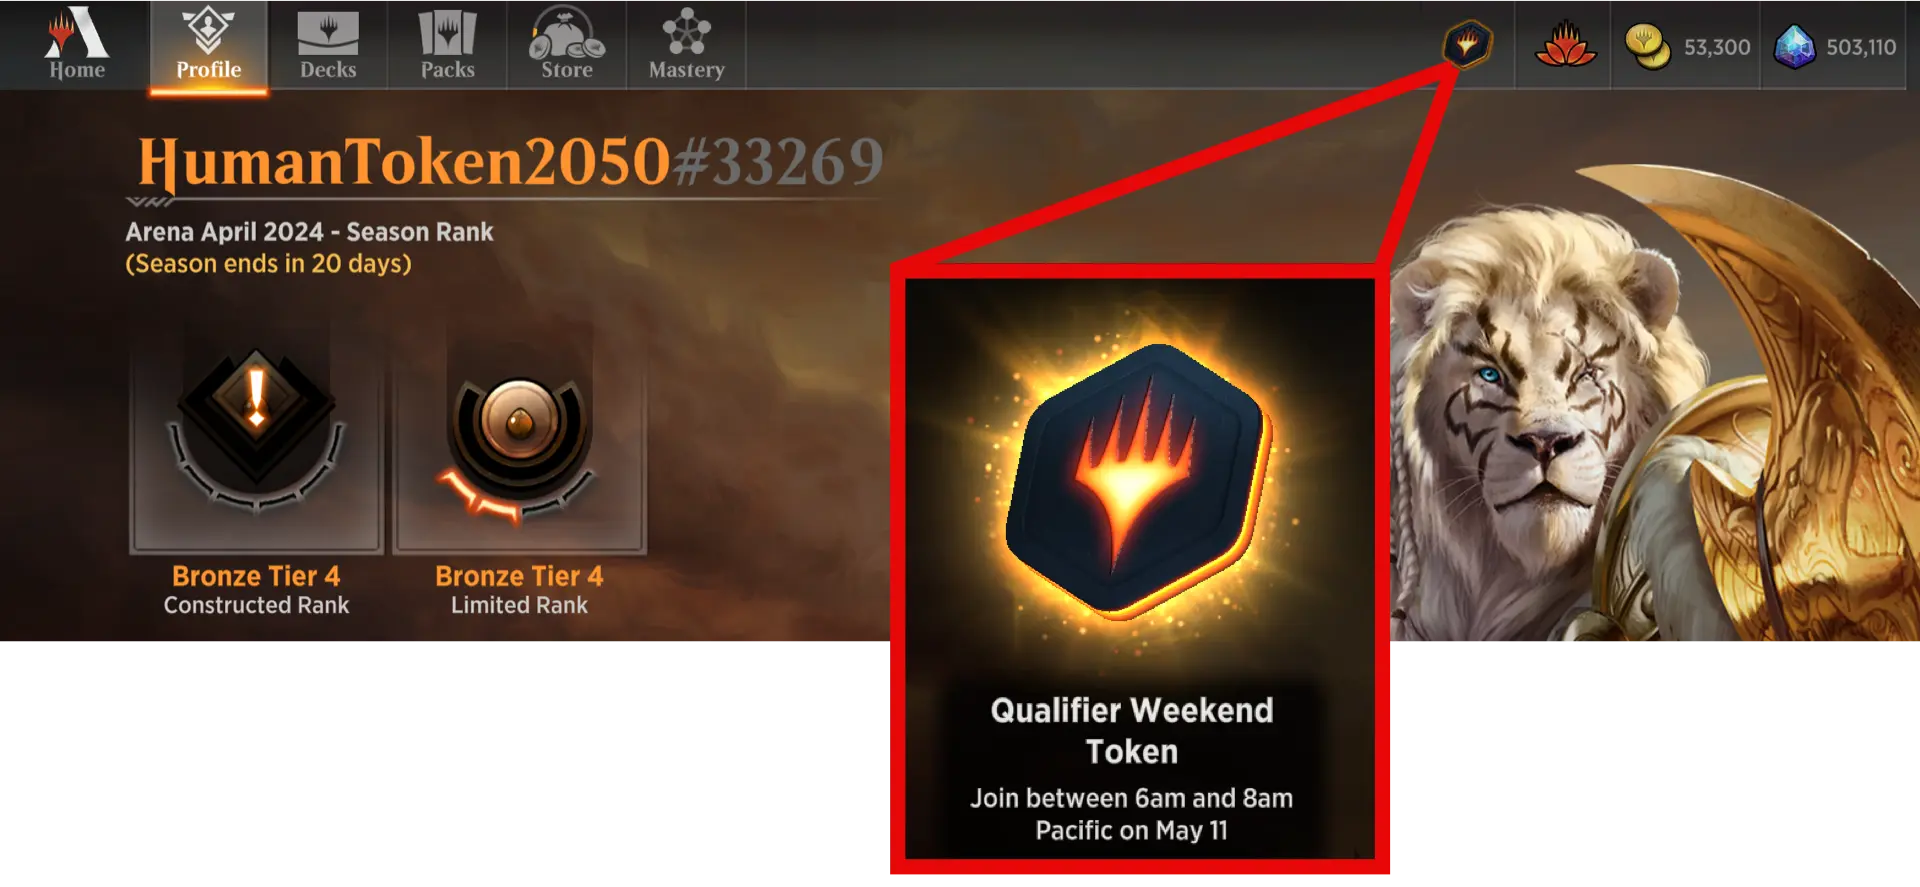 MTG Arena season rank with token image in the top menu bar illustrated with an inset of Qualifier Weekend token